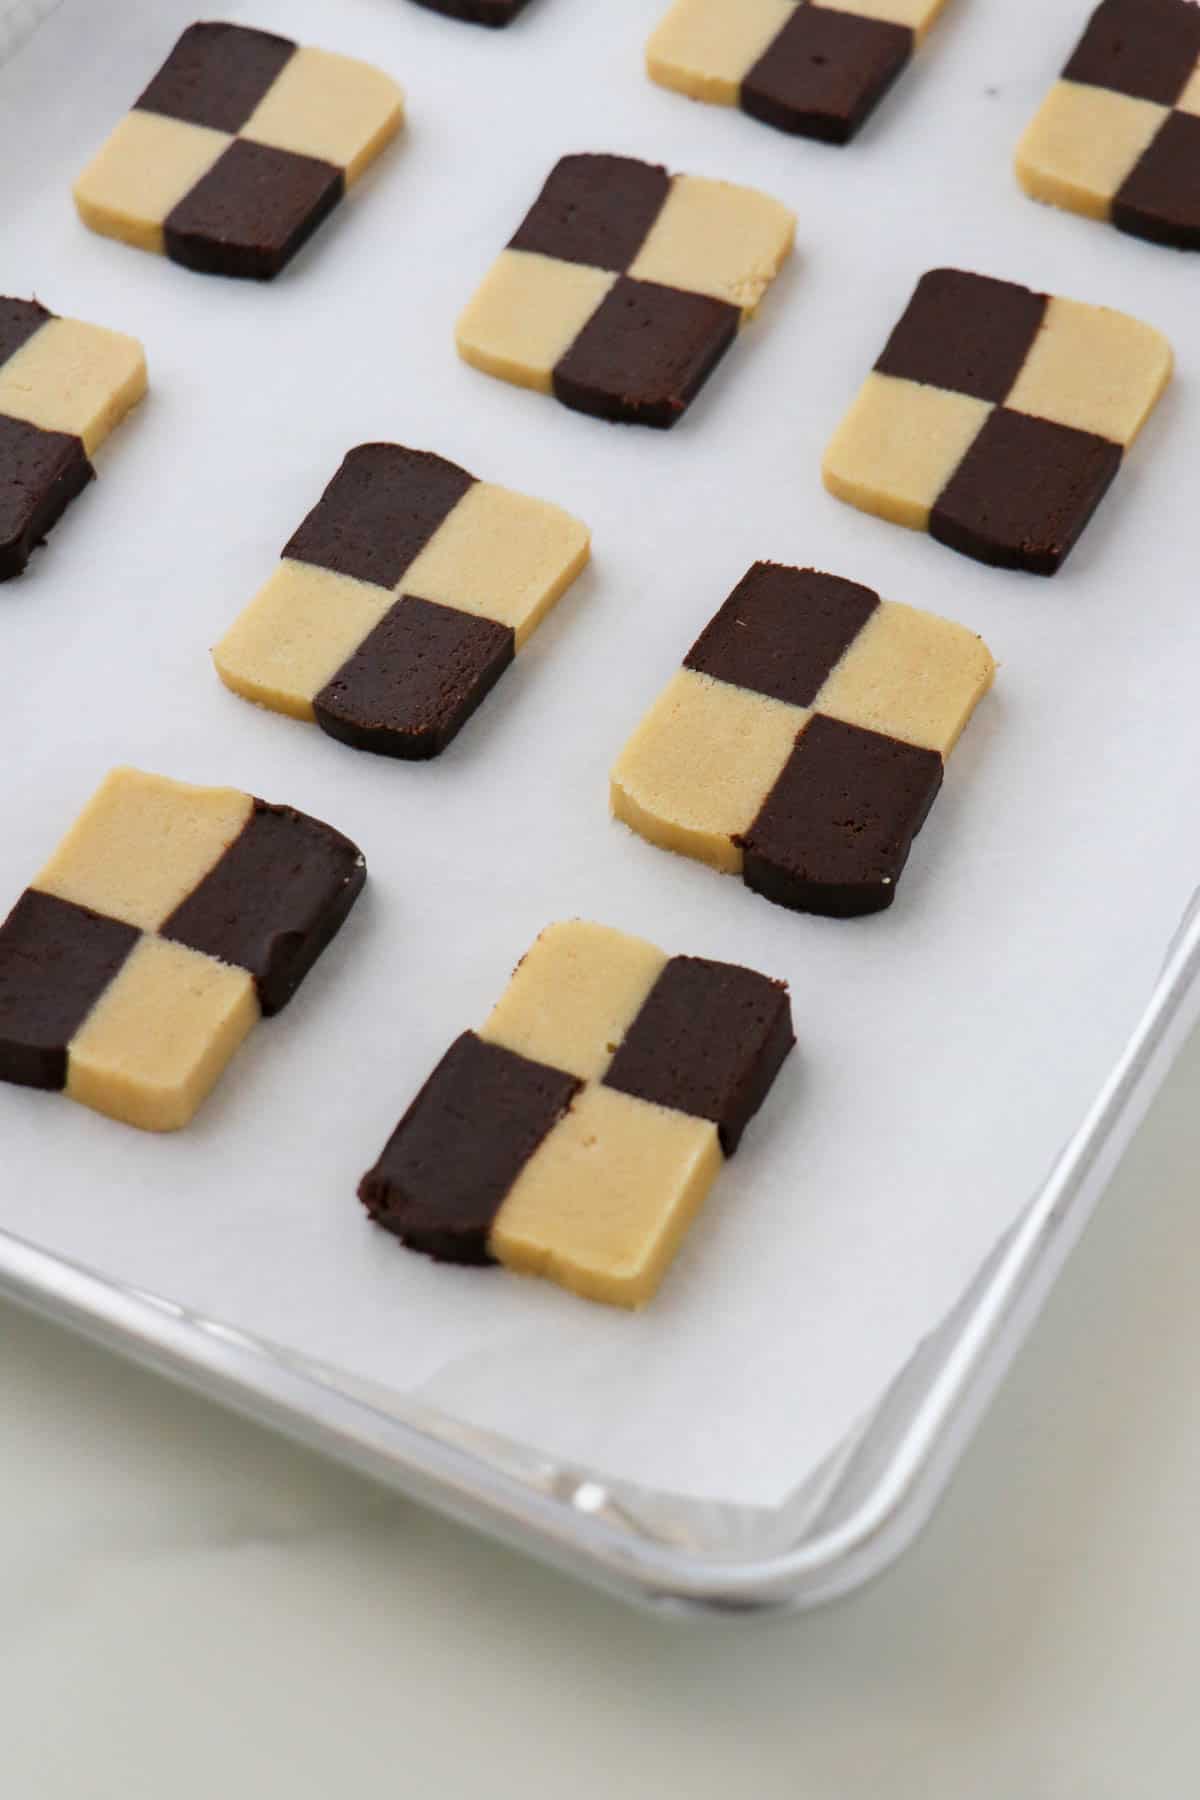 Unbaked checkerboard cookies on a baking sheet.